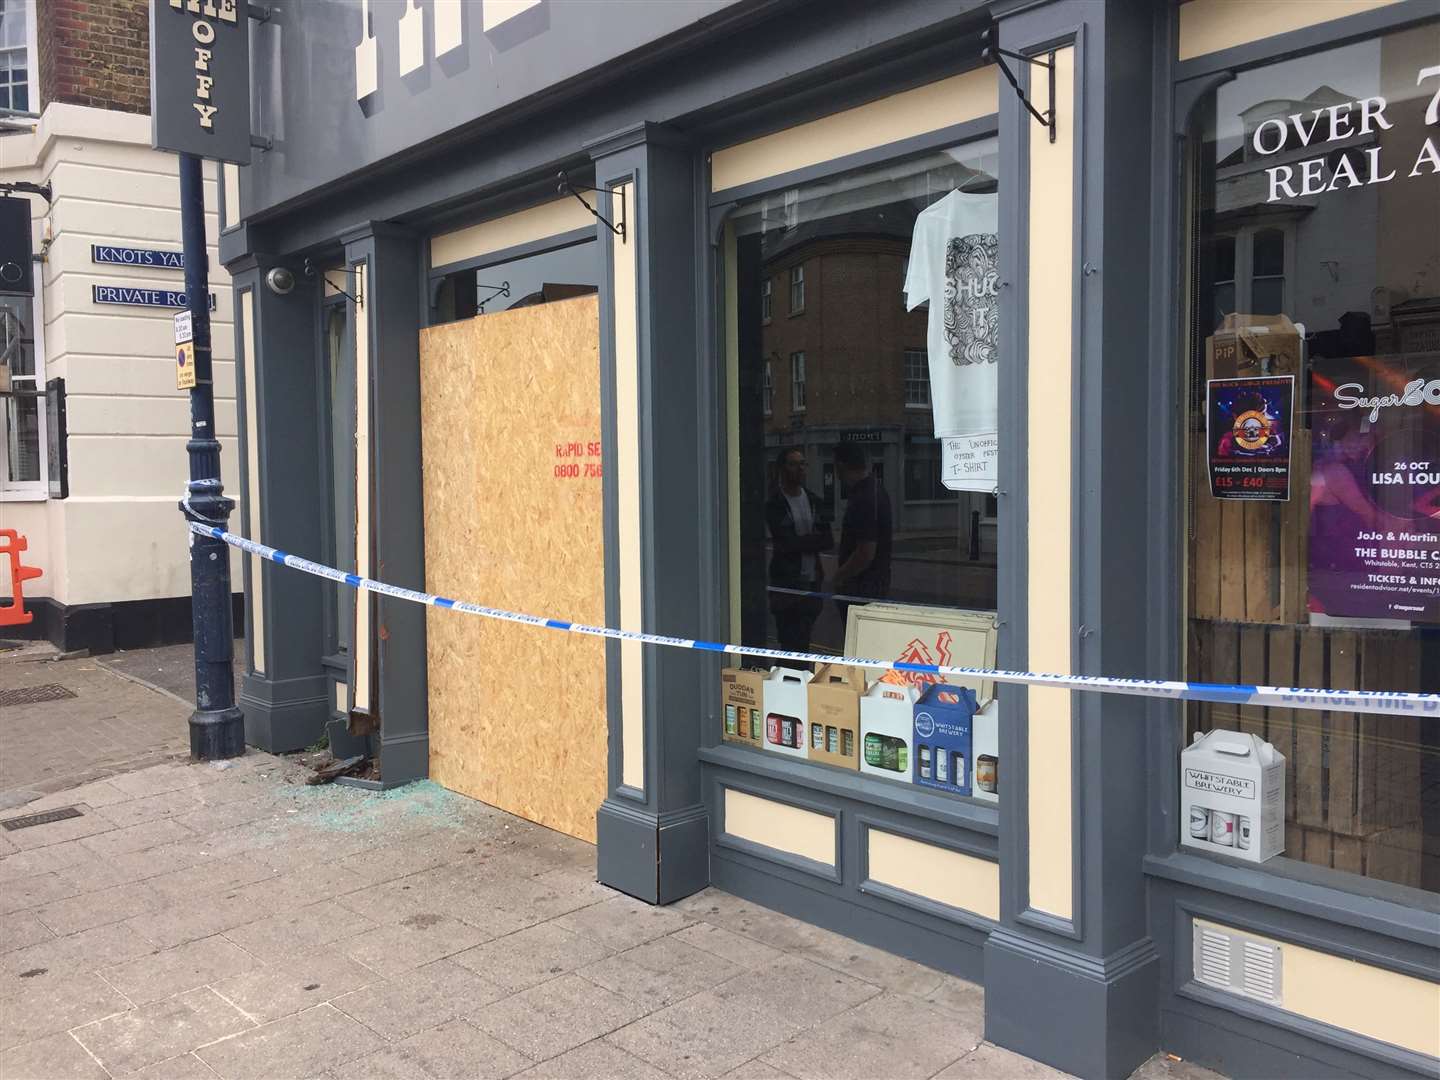 The shop doors were boarded up by police